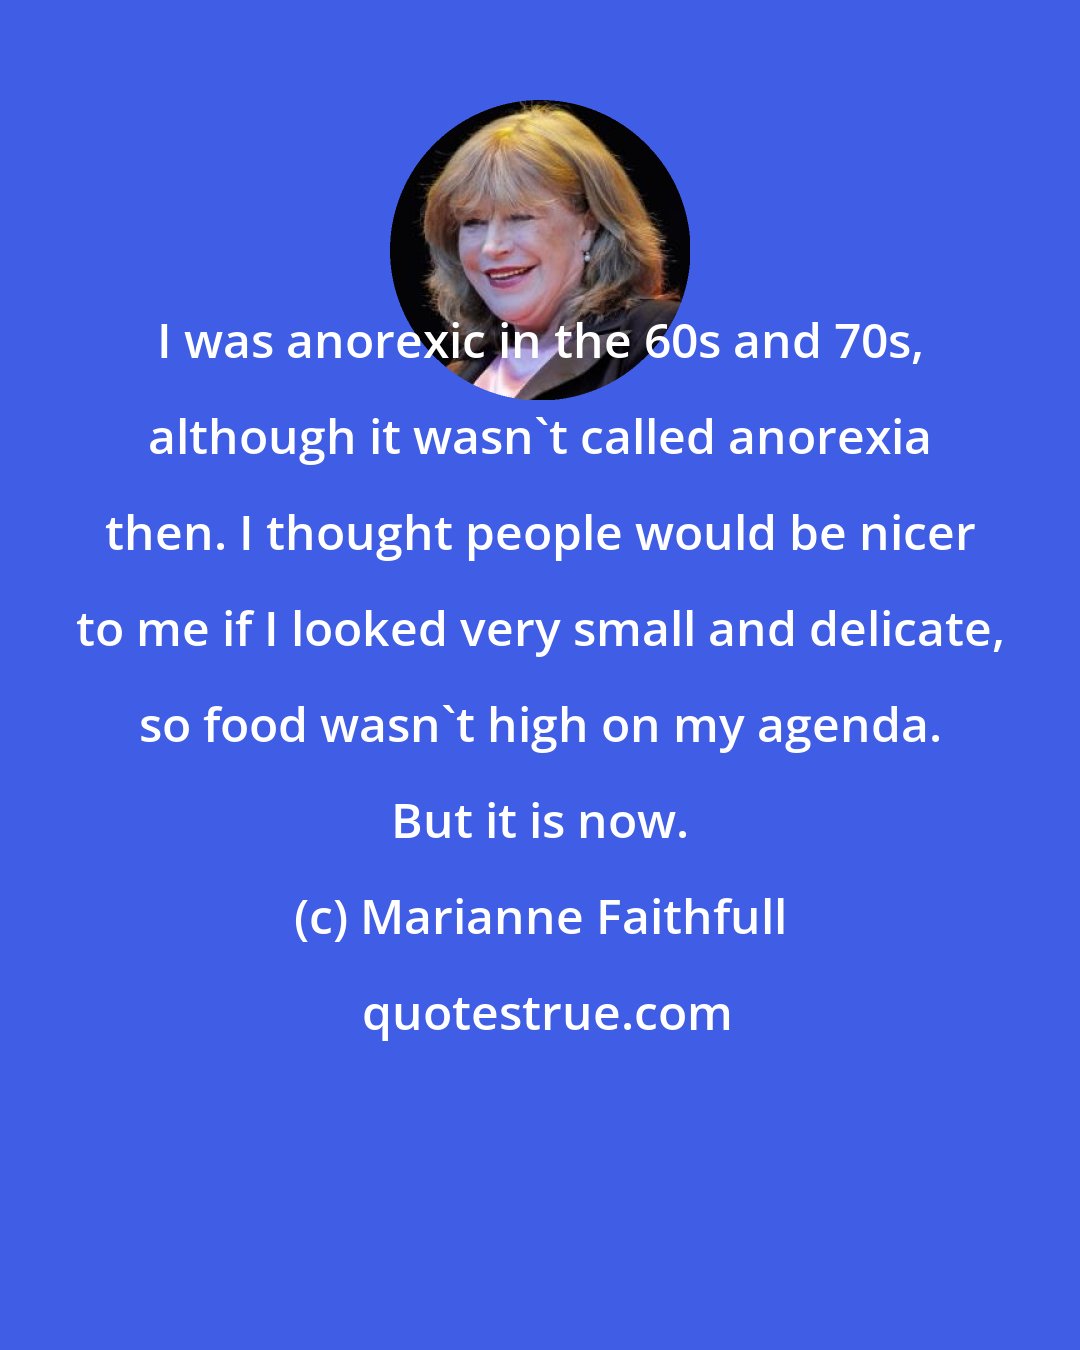 Marianne Faithfull: I was anorexic in the 60s and 70s, although it wasn't called anorexia then. I thought people would be nicer to me if I looked very small and delicate, so food wasn't high on my agenda. But it is now.